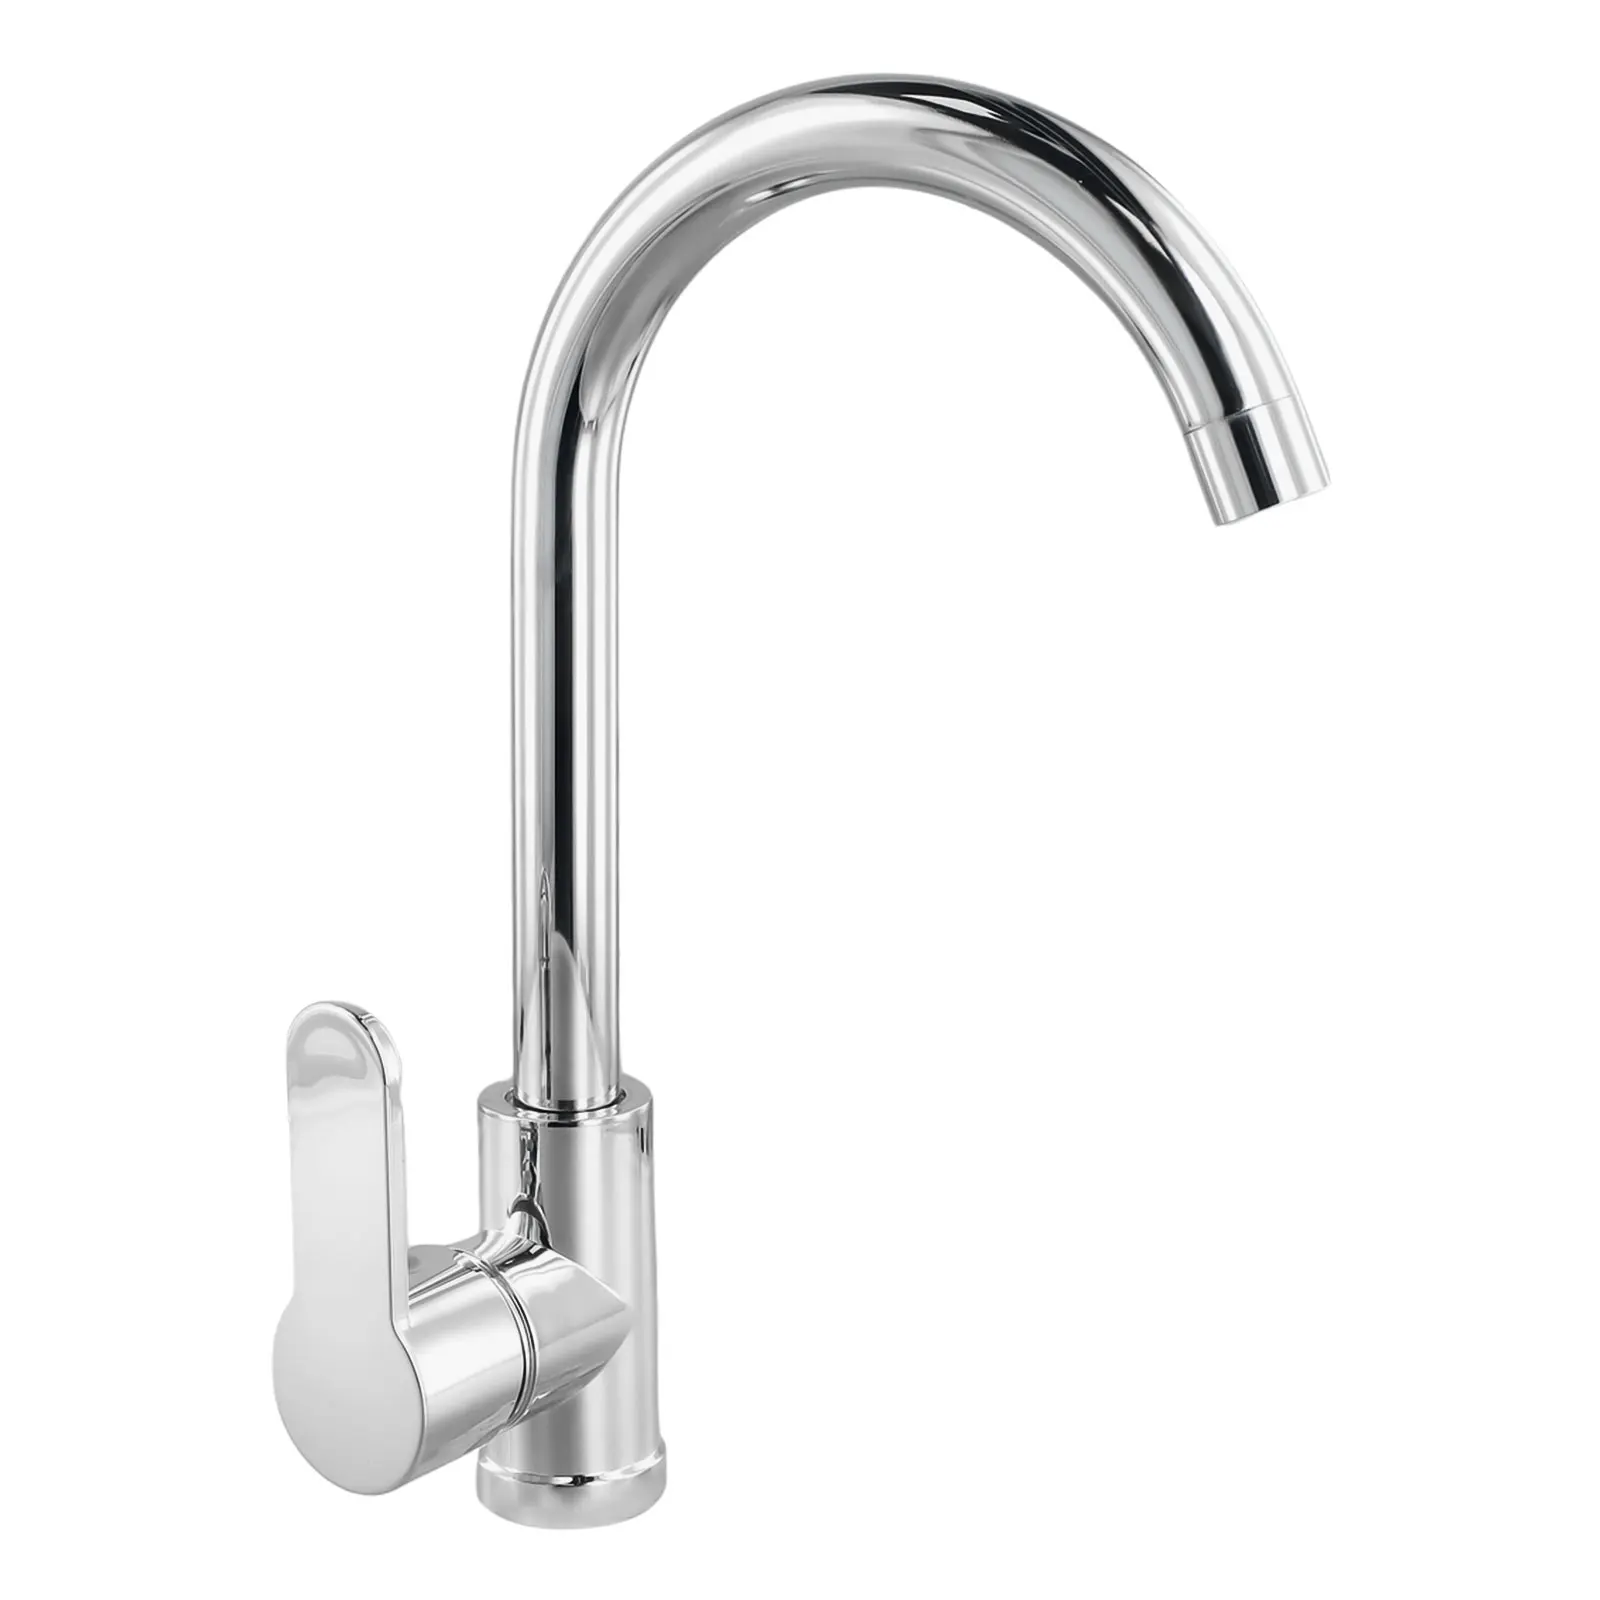 Stainless Steel Kitchen Faucet Polished Chrome Plated Swivel Basin Sink Cold Hot Easy To Operate Mixer Tap kitchen faucet antique brass swivel bathroom basin sink mixer tap with ceramic crane hot